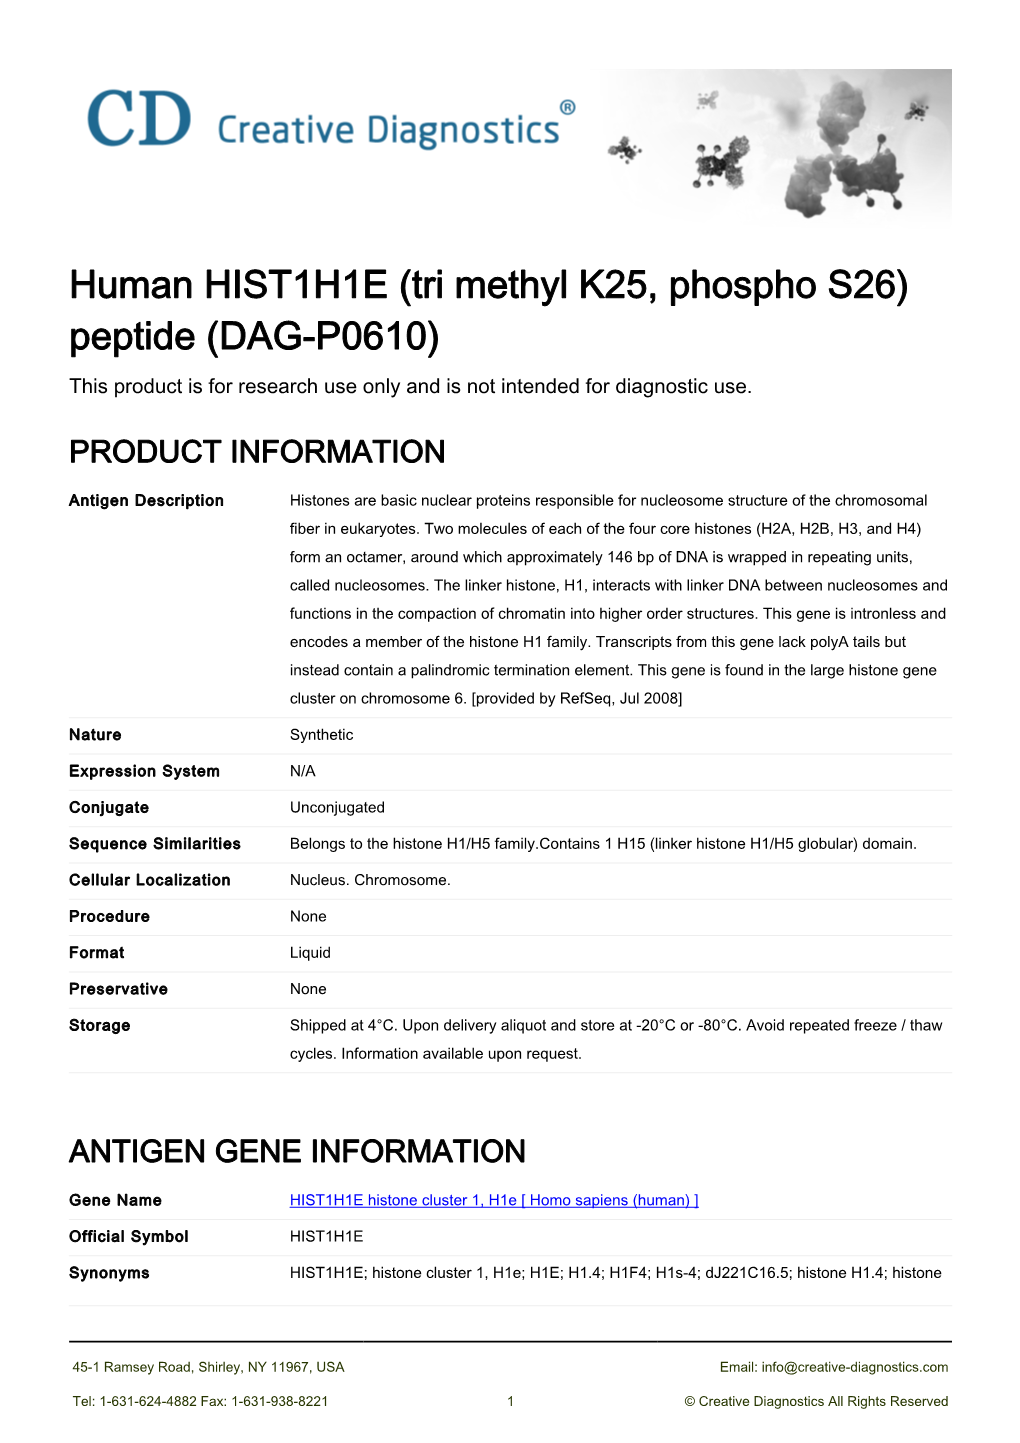 Human HIST1H1E (Tri Methyl K25, Phospho S26) Peptide (DAG-P0610) This Product Is for Research Use Only and Is Not Intended for Diagnostic Use